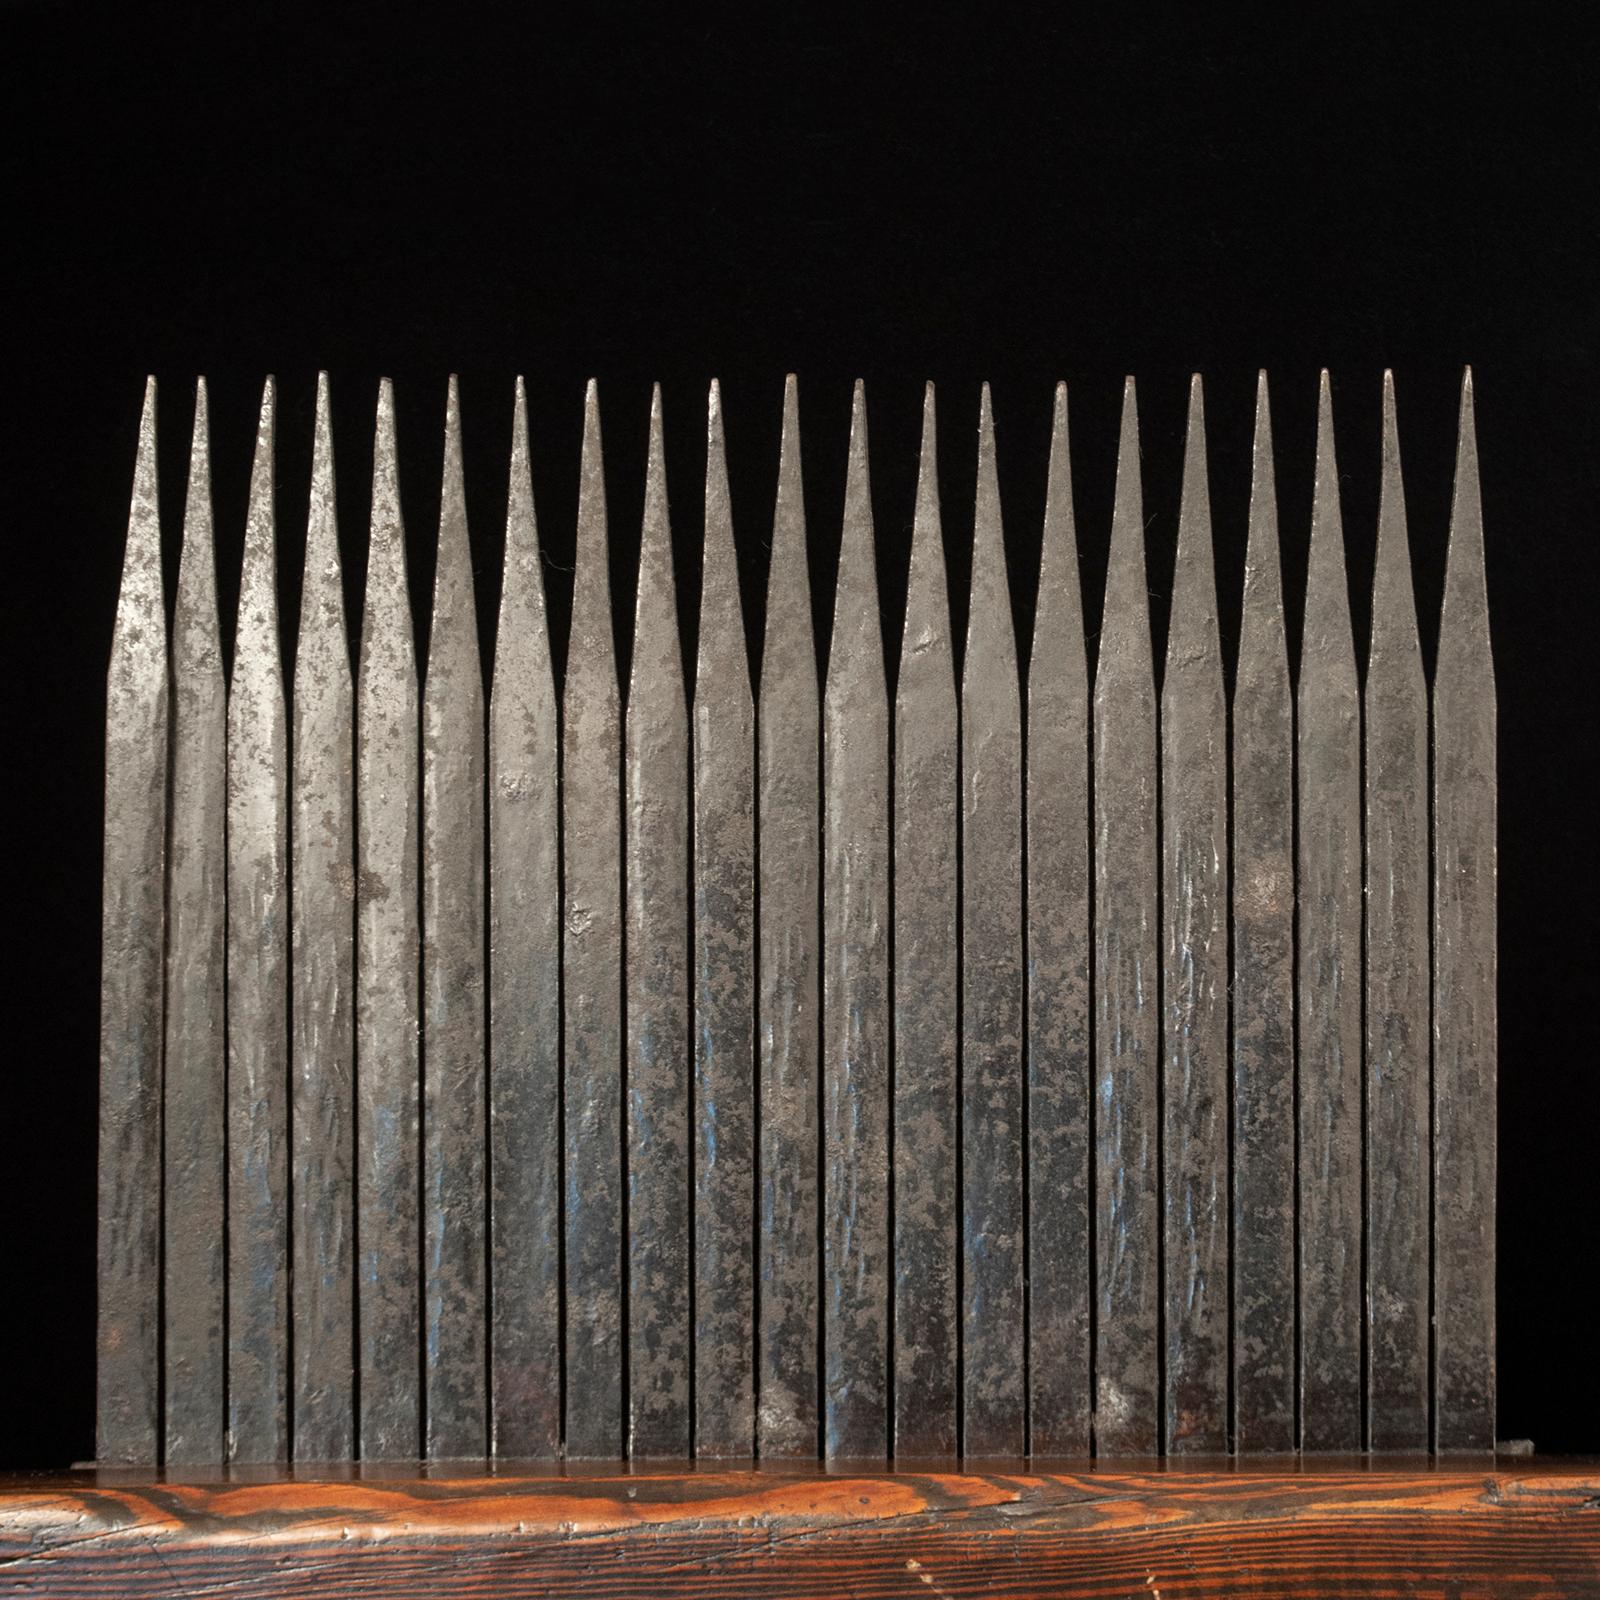 Hand-Crafted Meiji Period Rice Straw Comb, Japan	